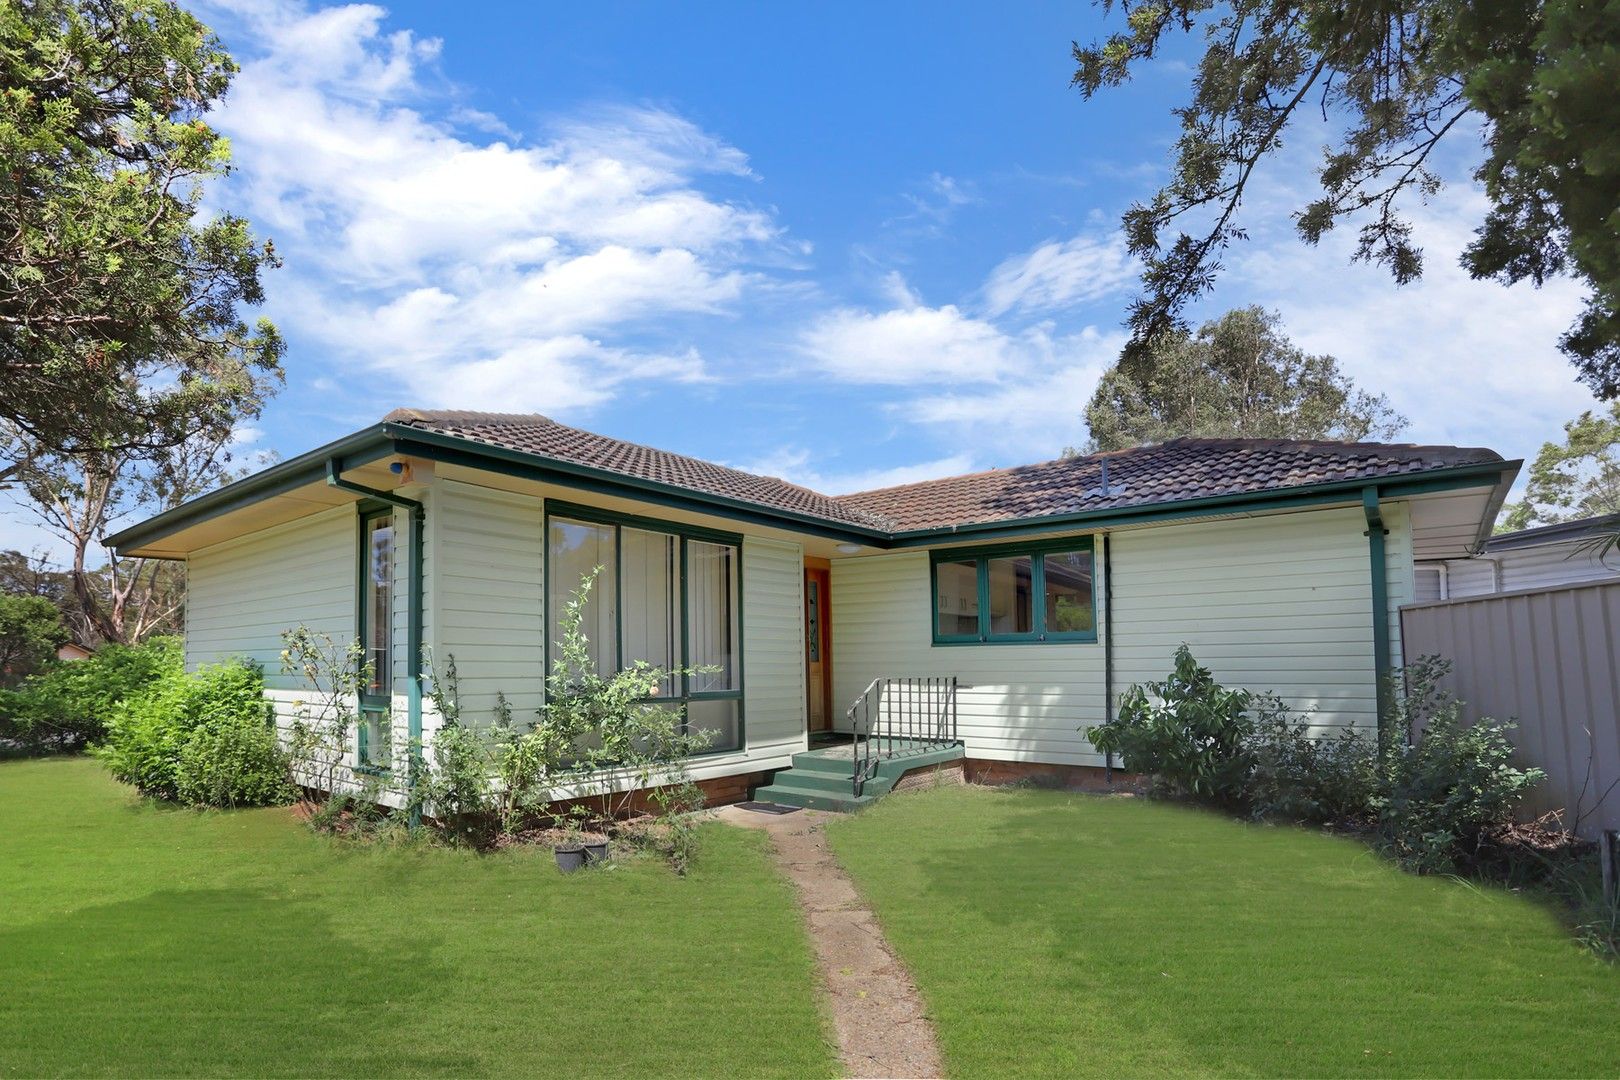 5 bedrooms House in 26 & 26a Houtman Ave WILLMOT NSW, 2770